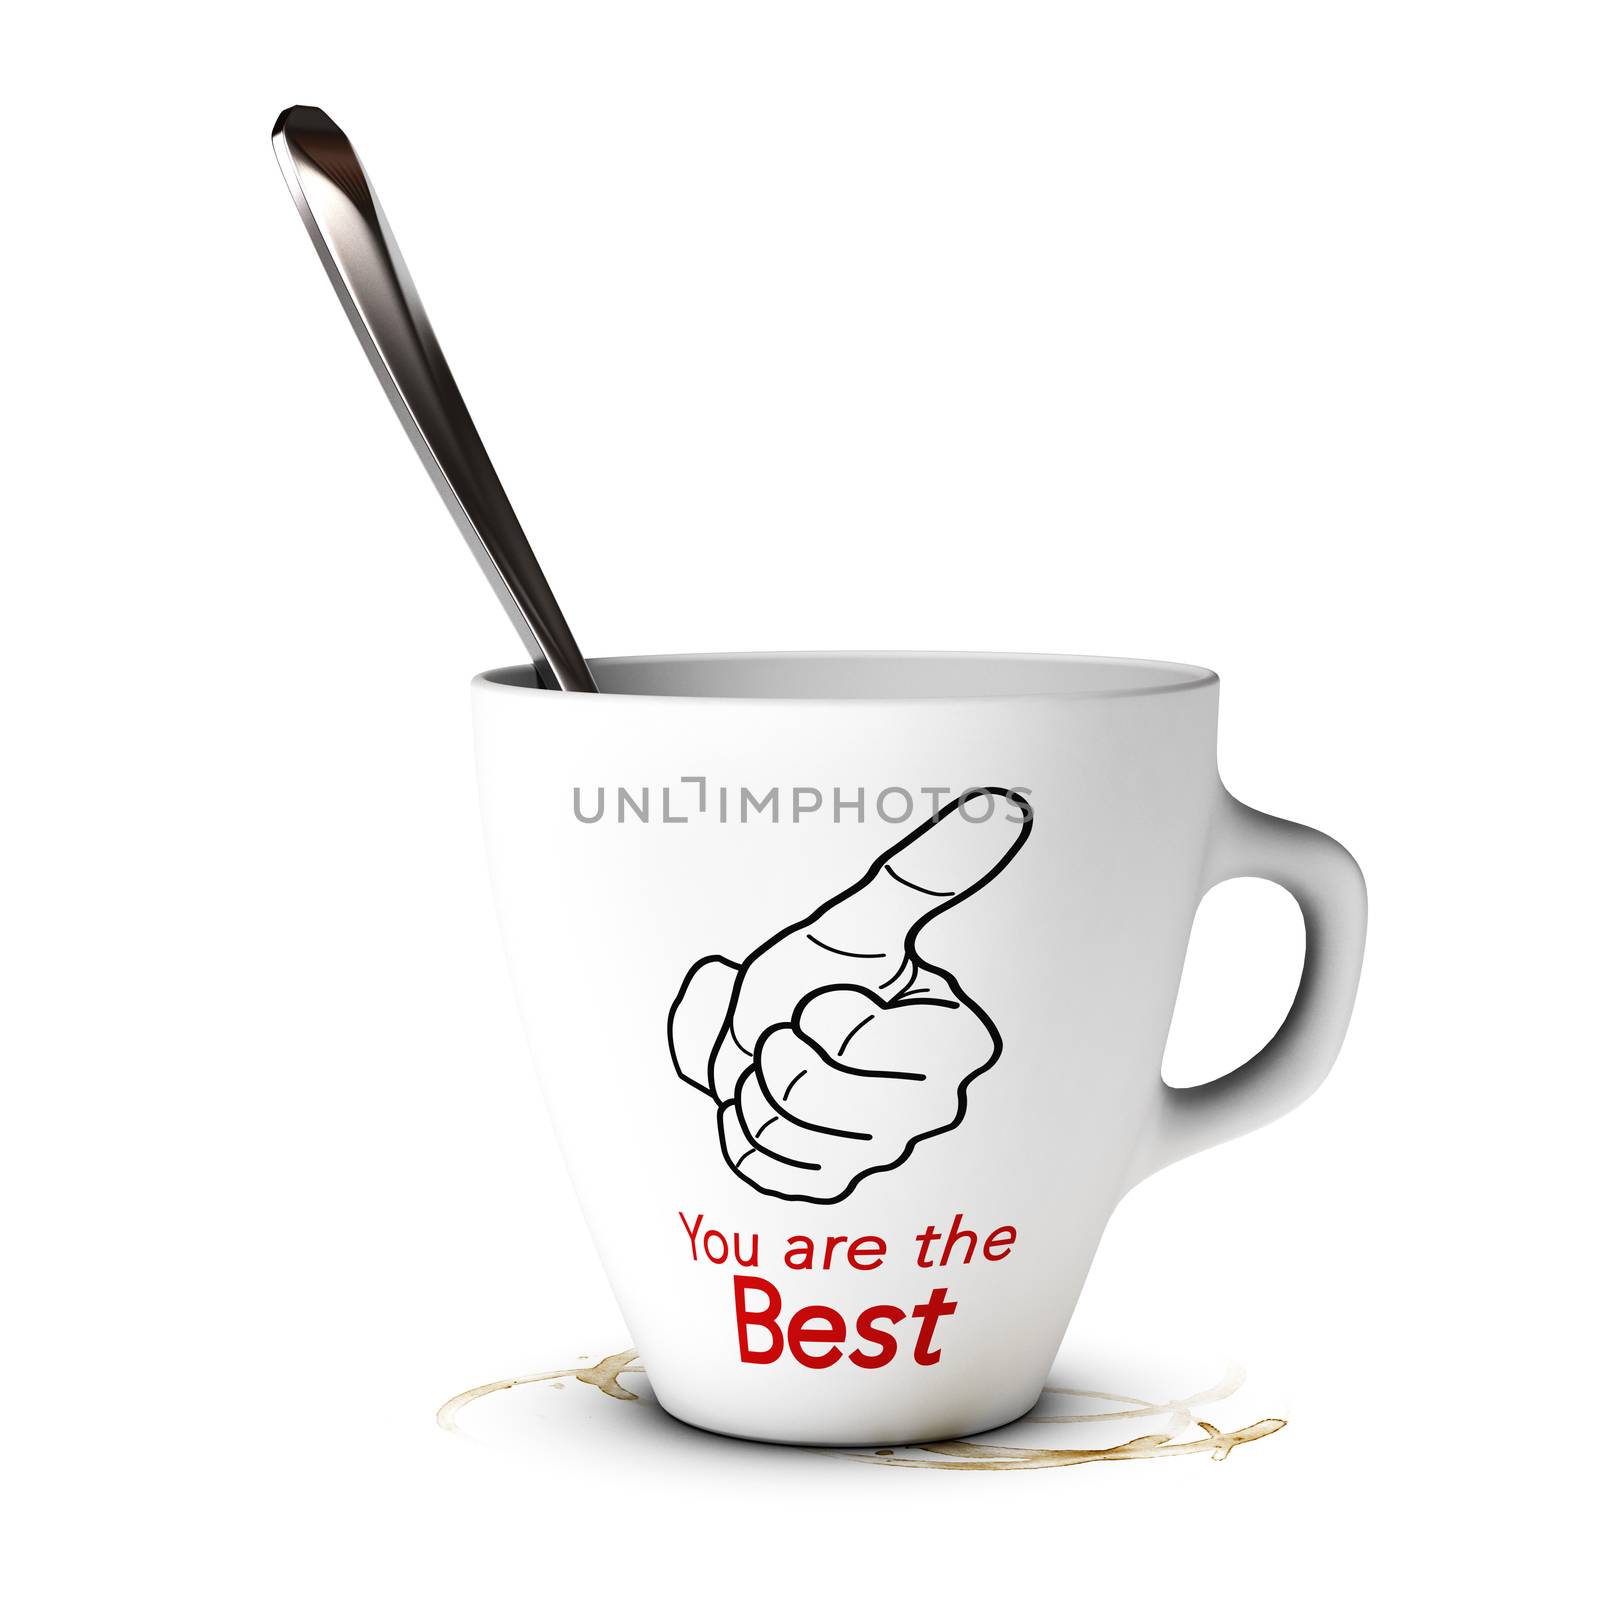 Mug with the text you are the best over white background. 3D illustration. Psychological concept of overinflated ego or autosuggestion 